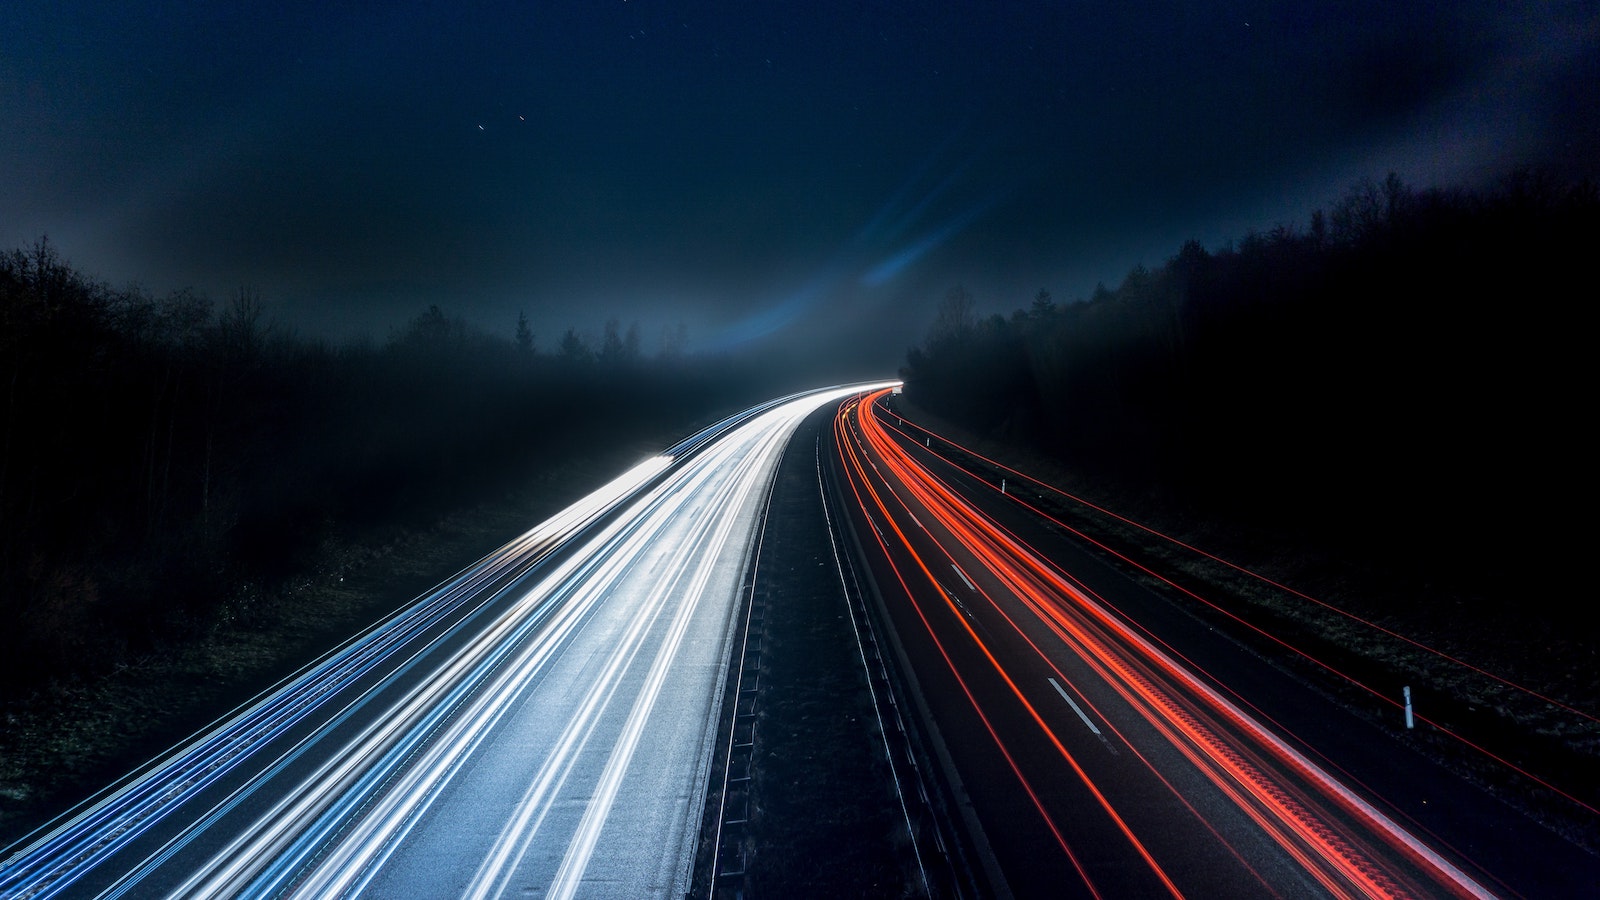 Long exposure of car lights on a highway at night